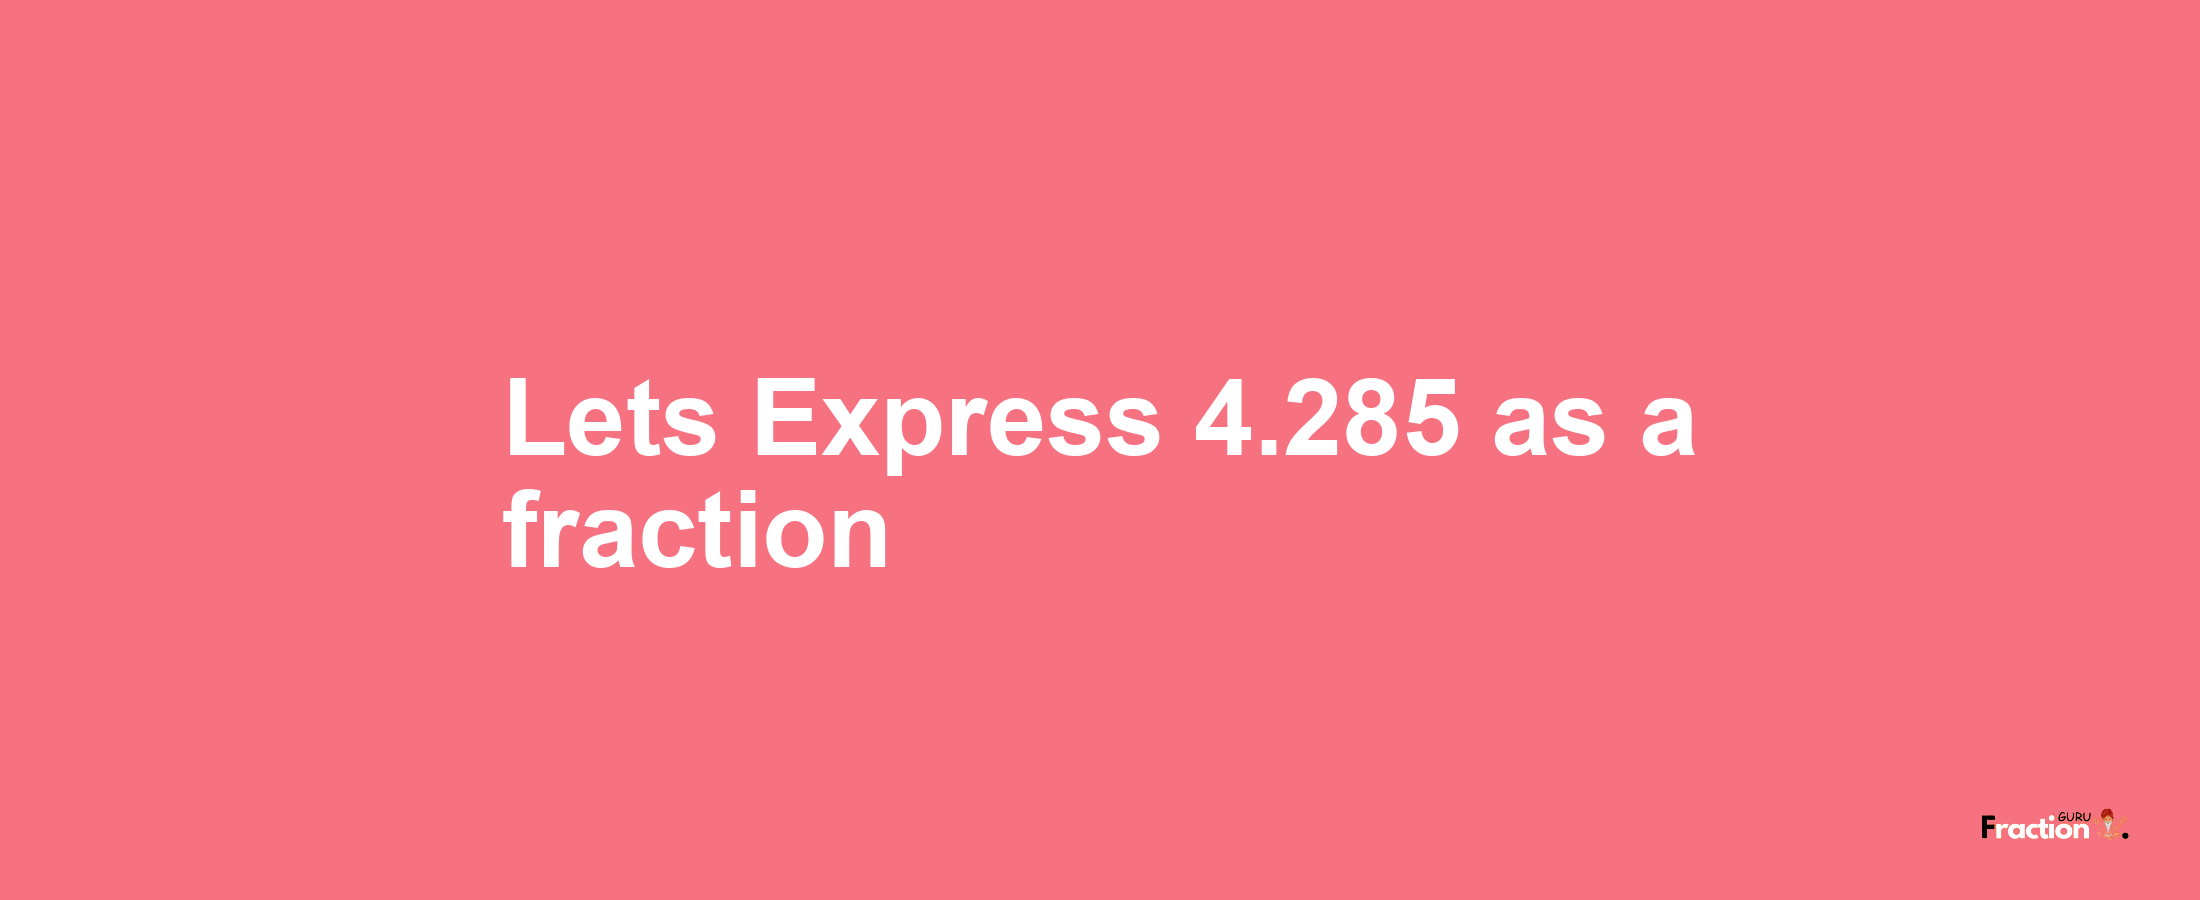 Lets Express 4.285 as afraction